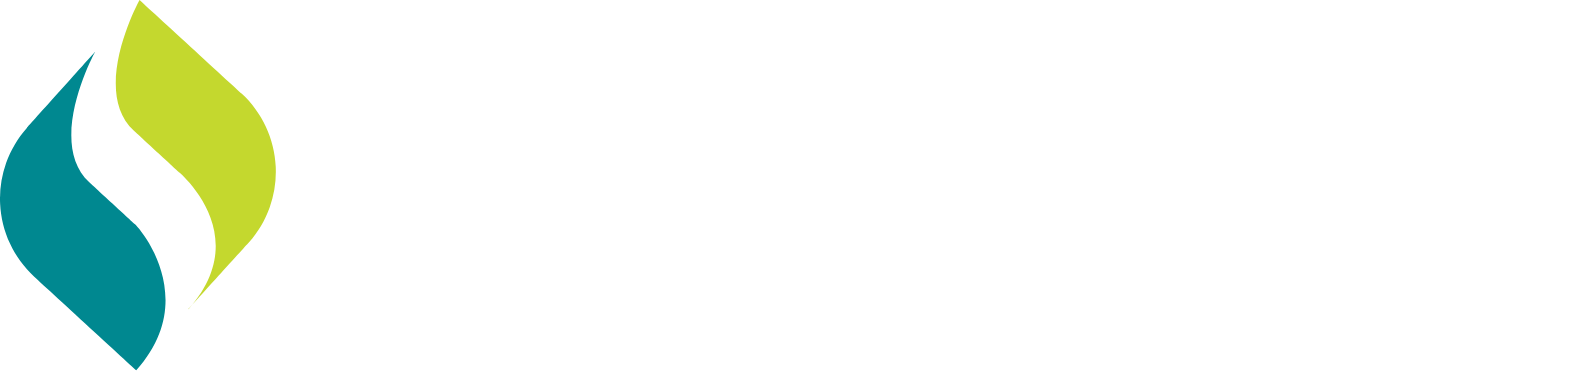 Signify Health logo in transparent PNG and vectorized SVG formats